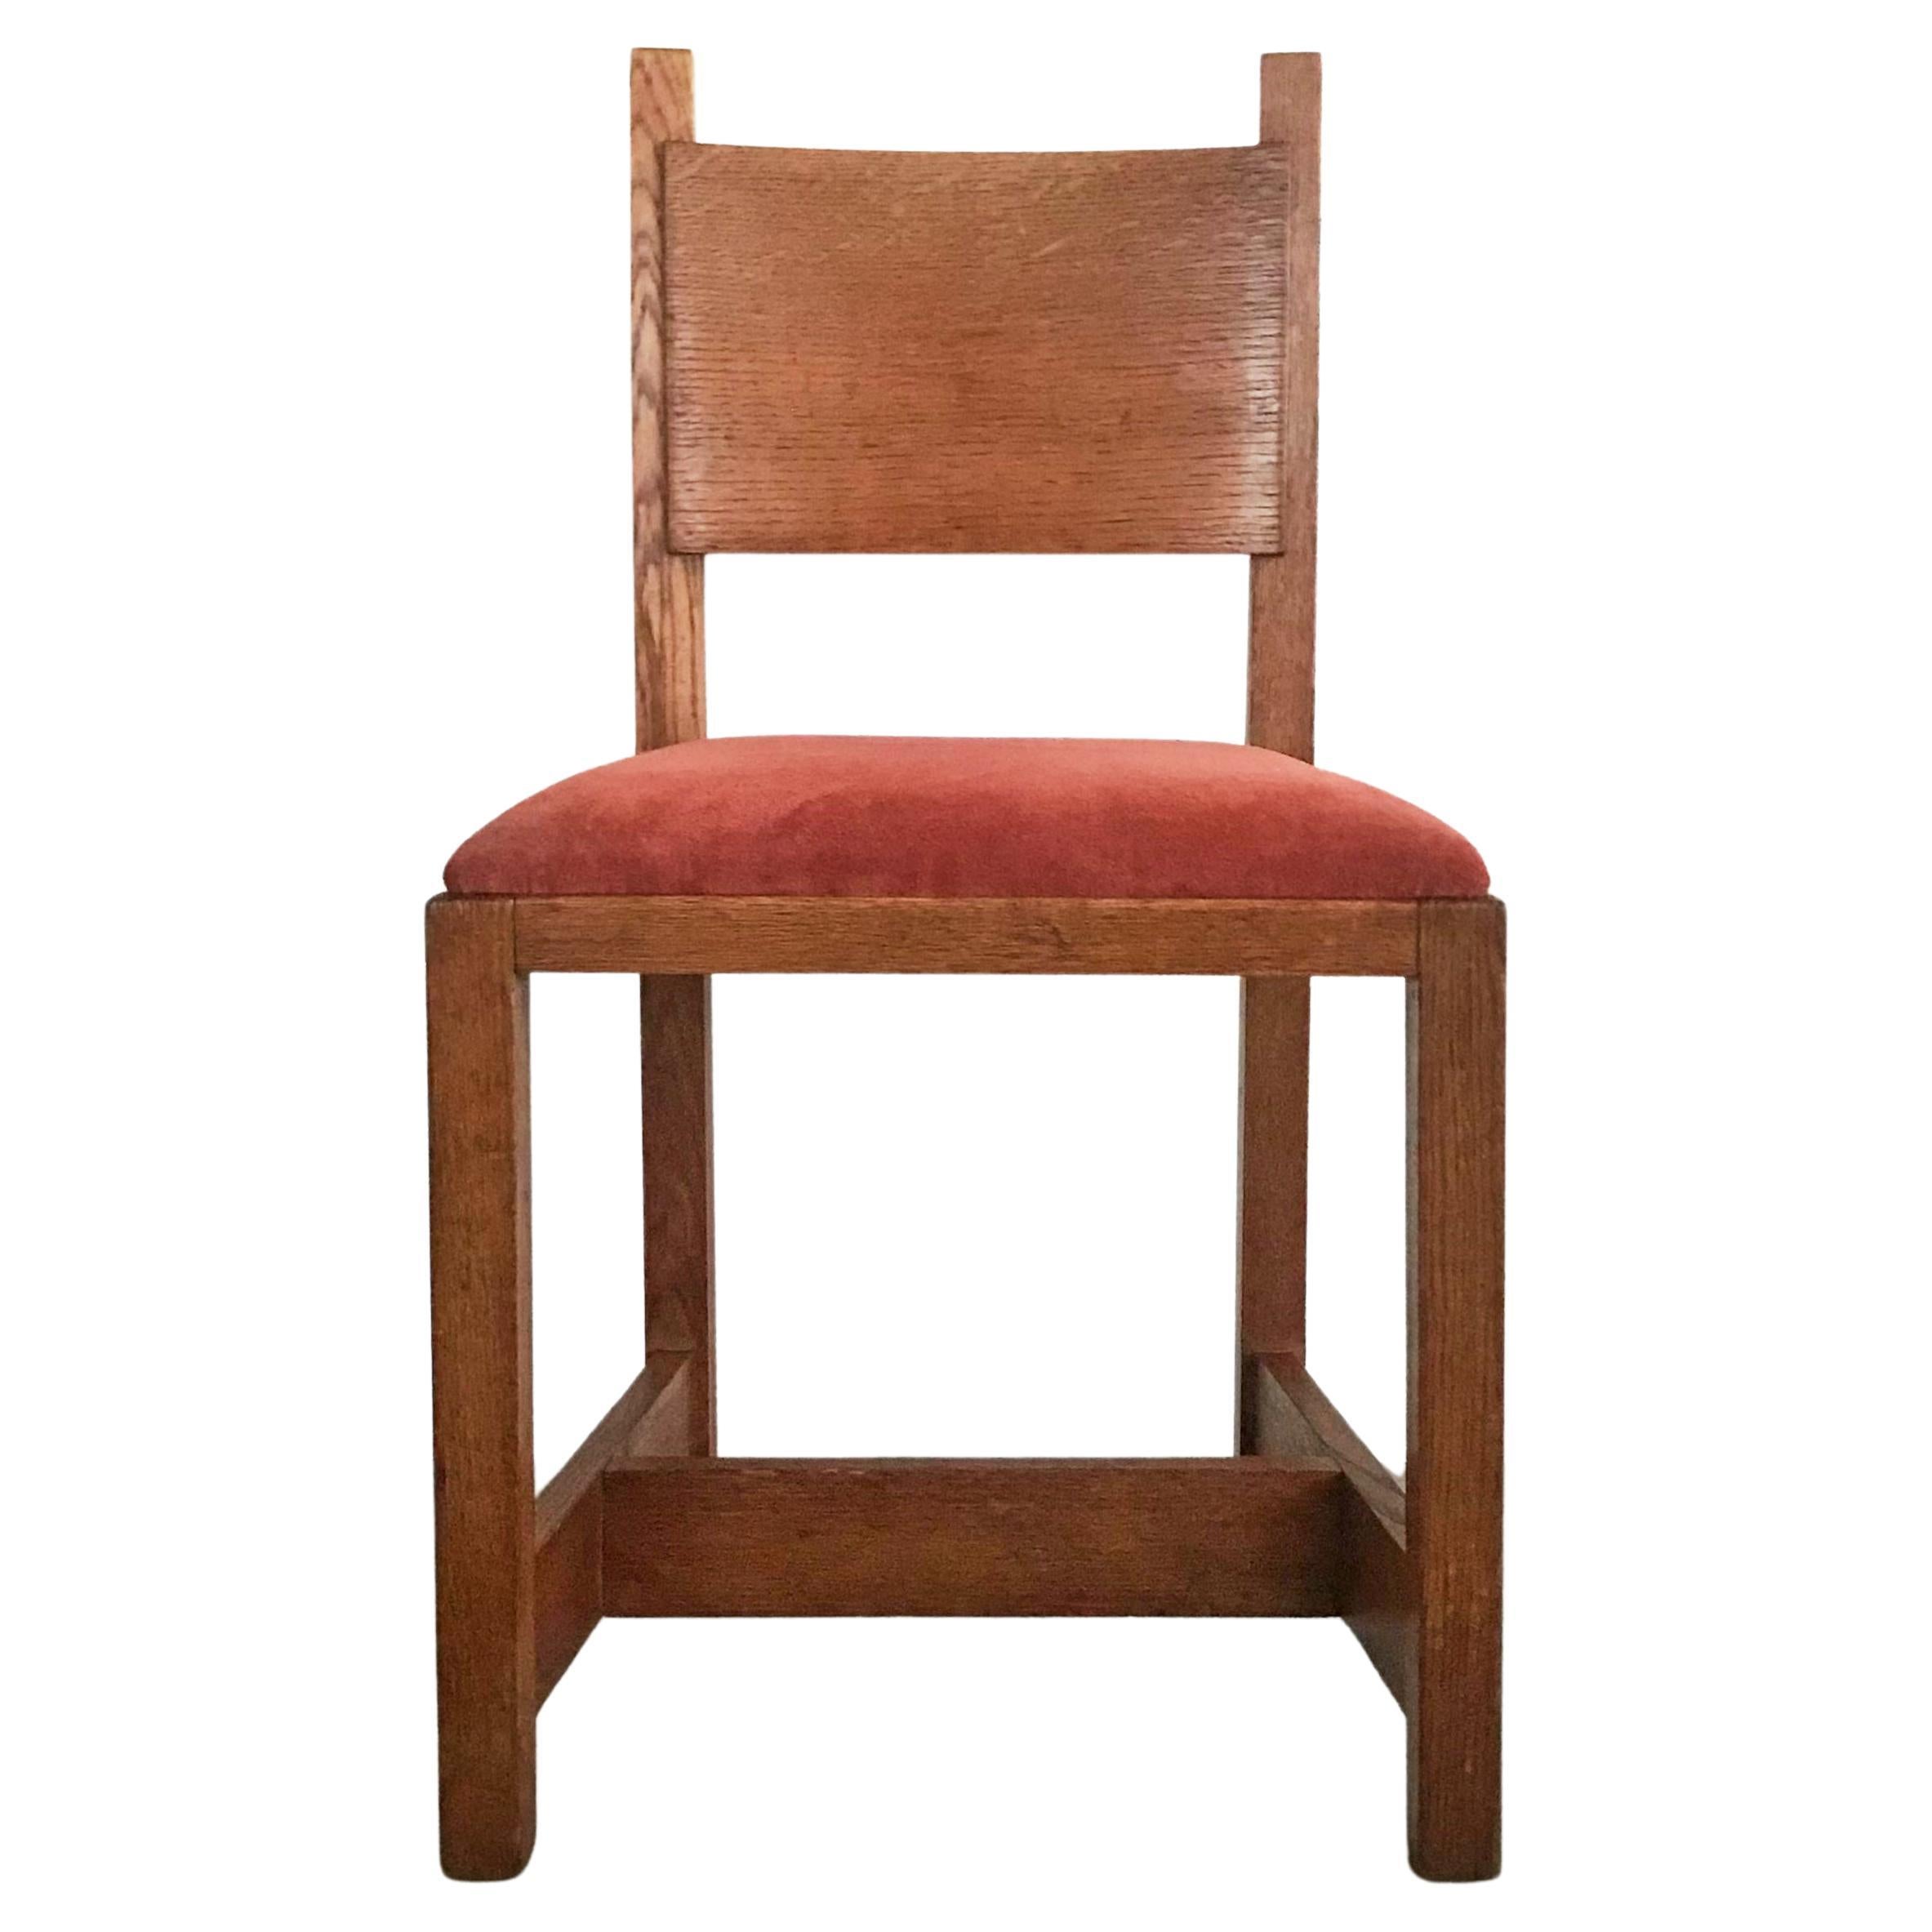 'Haagse School' Side Chair by Pander 1930s For Sale